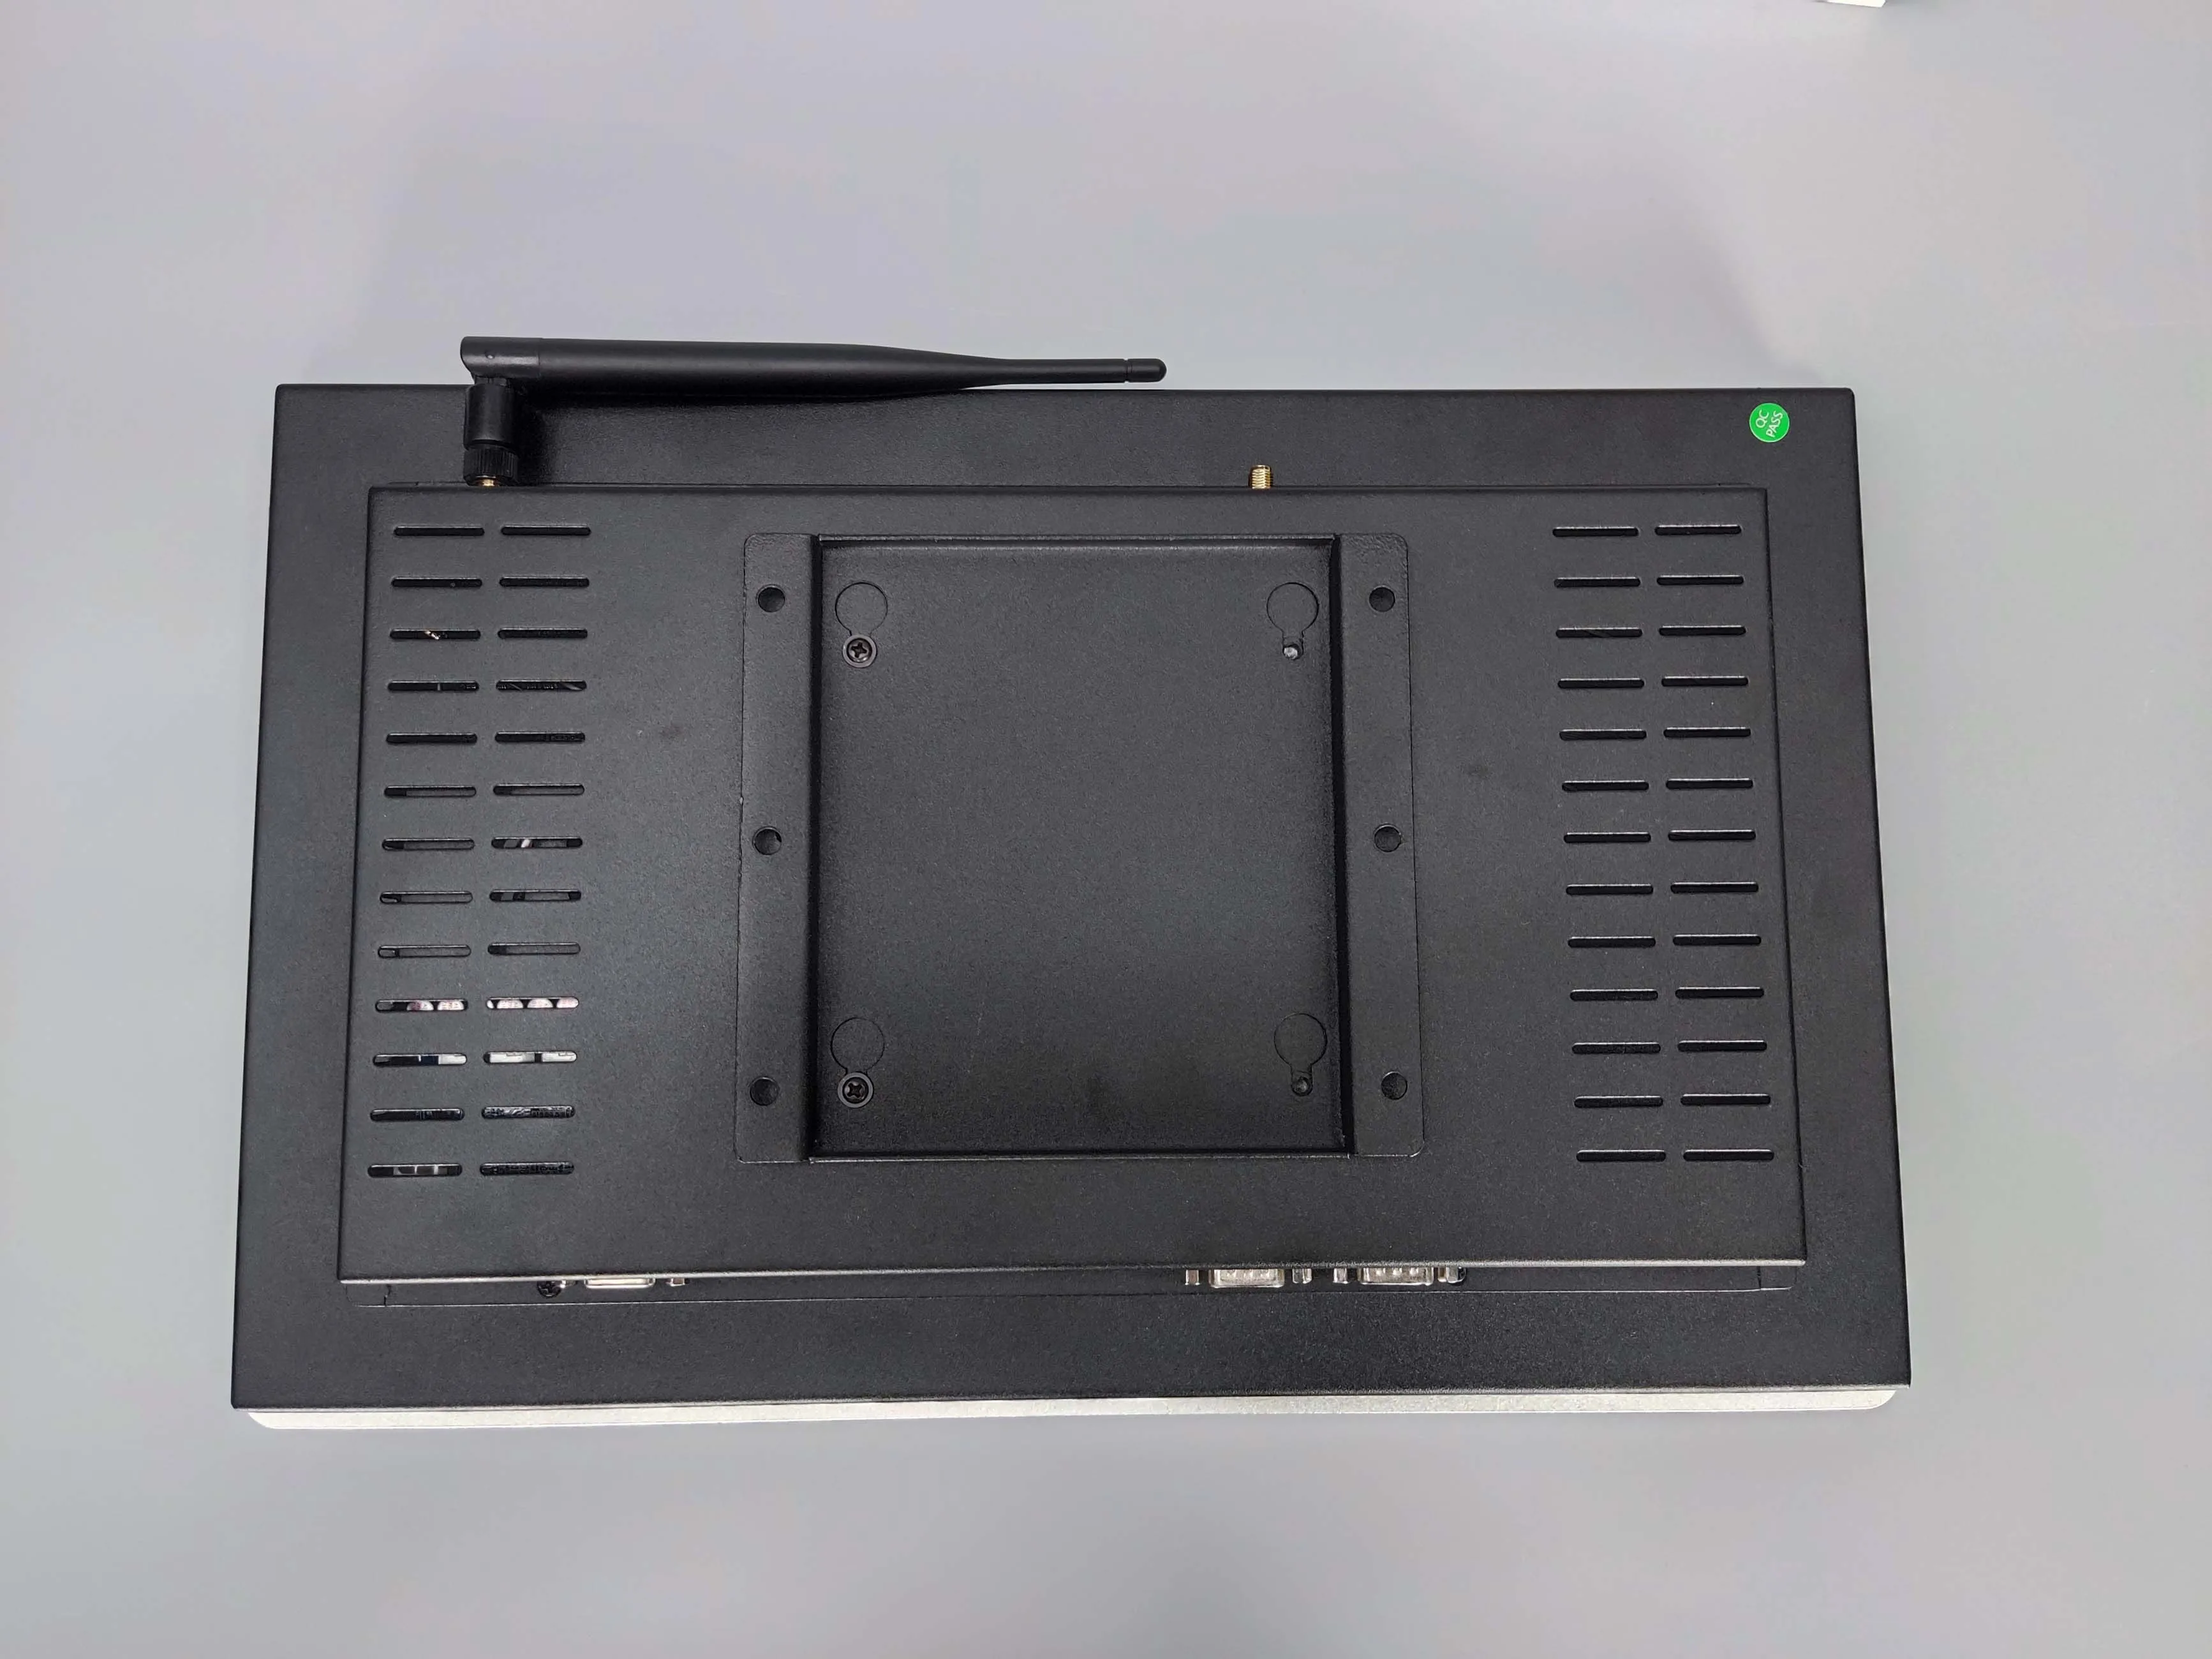 Embedded Wall Mounted Open Frame Industry All In One Computer Capacitive Resistive Touch Screen Ip65 Industrial Panel Pc